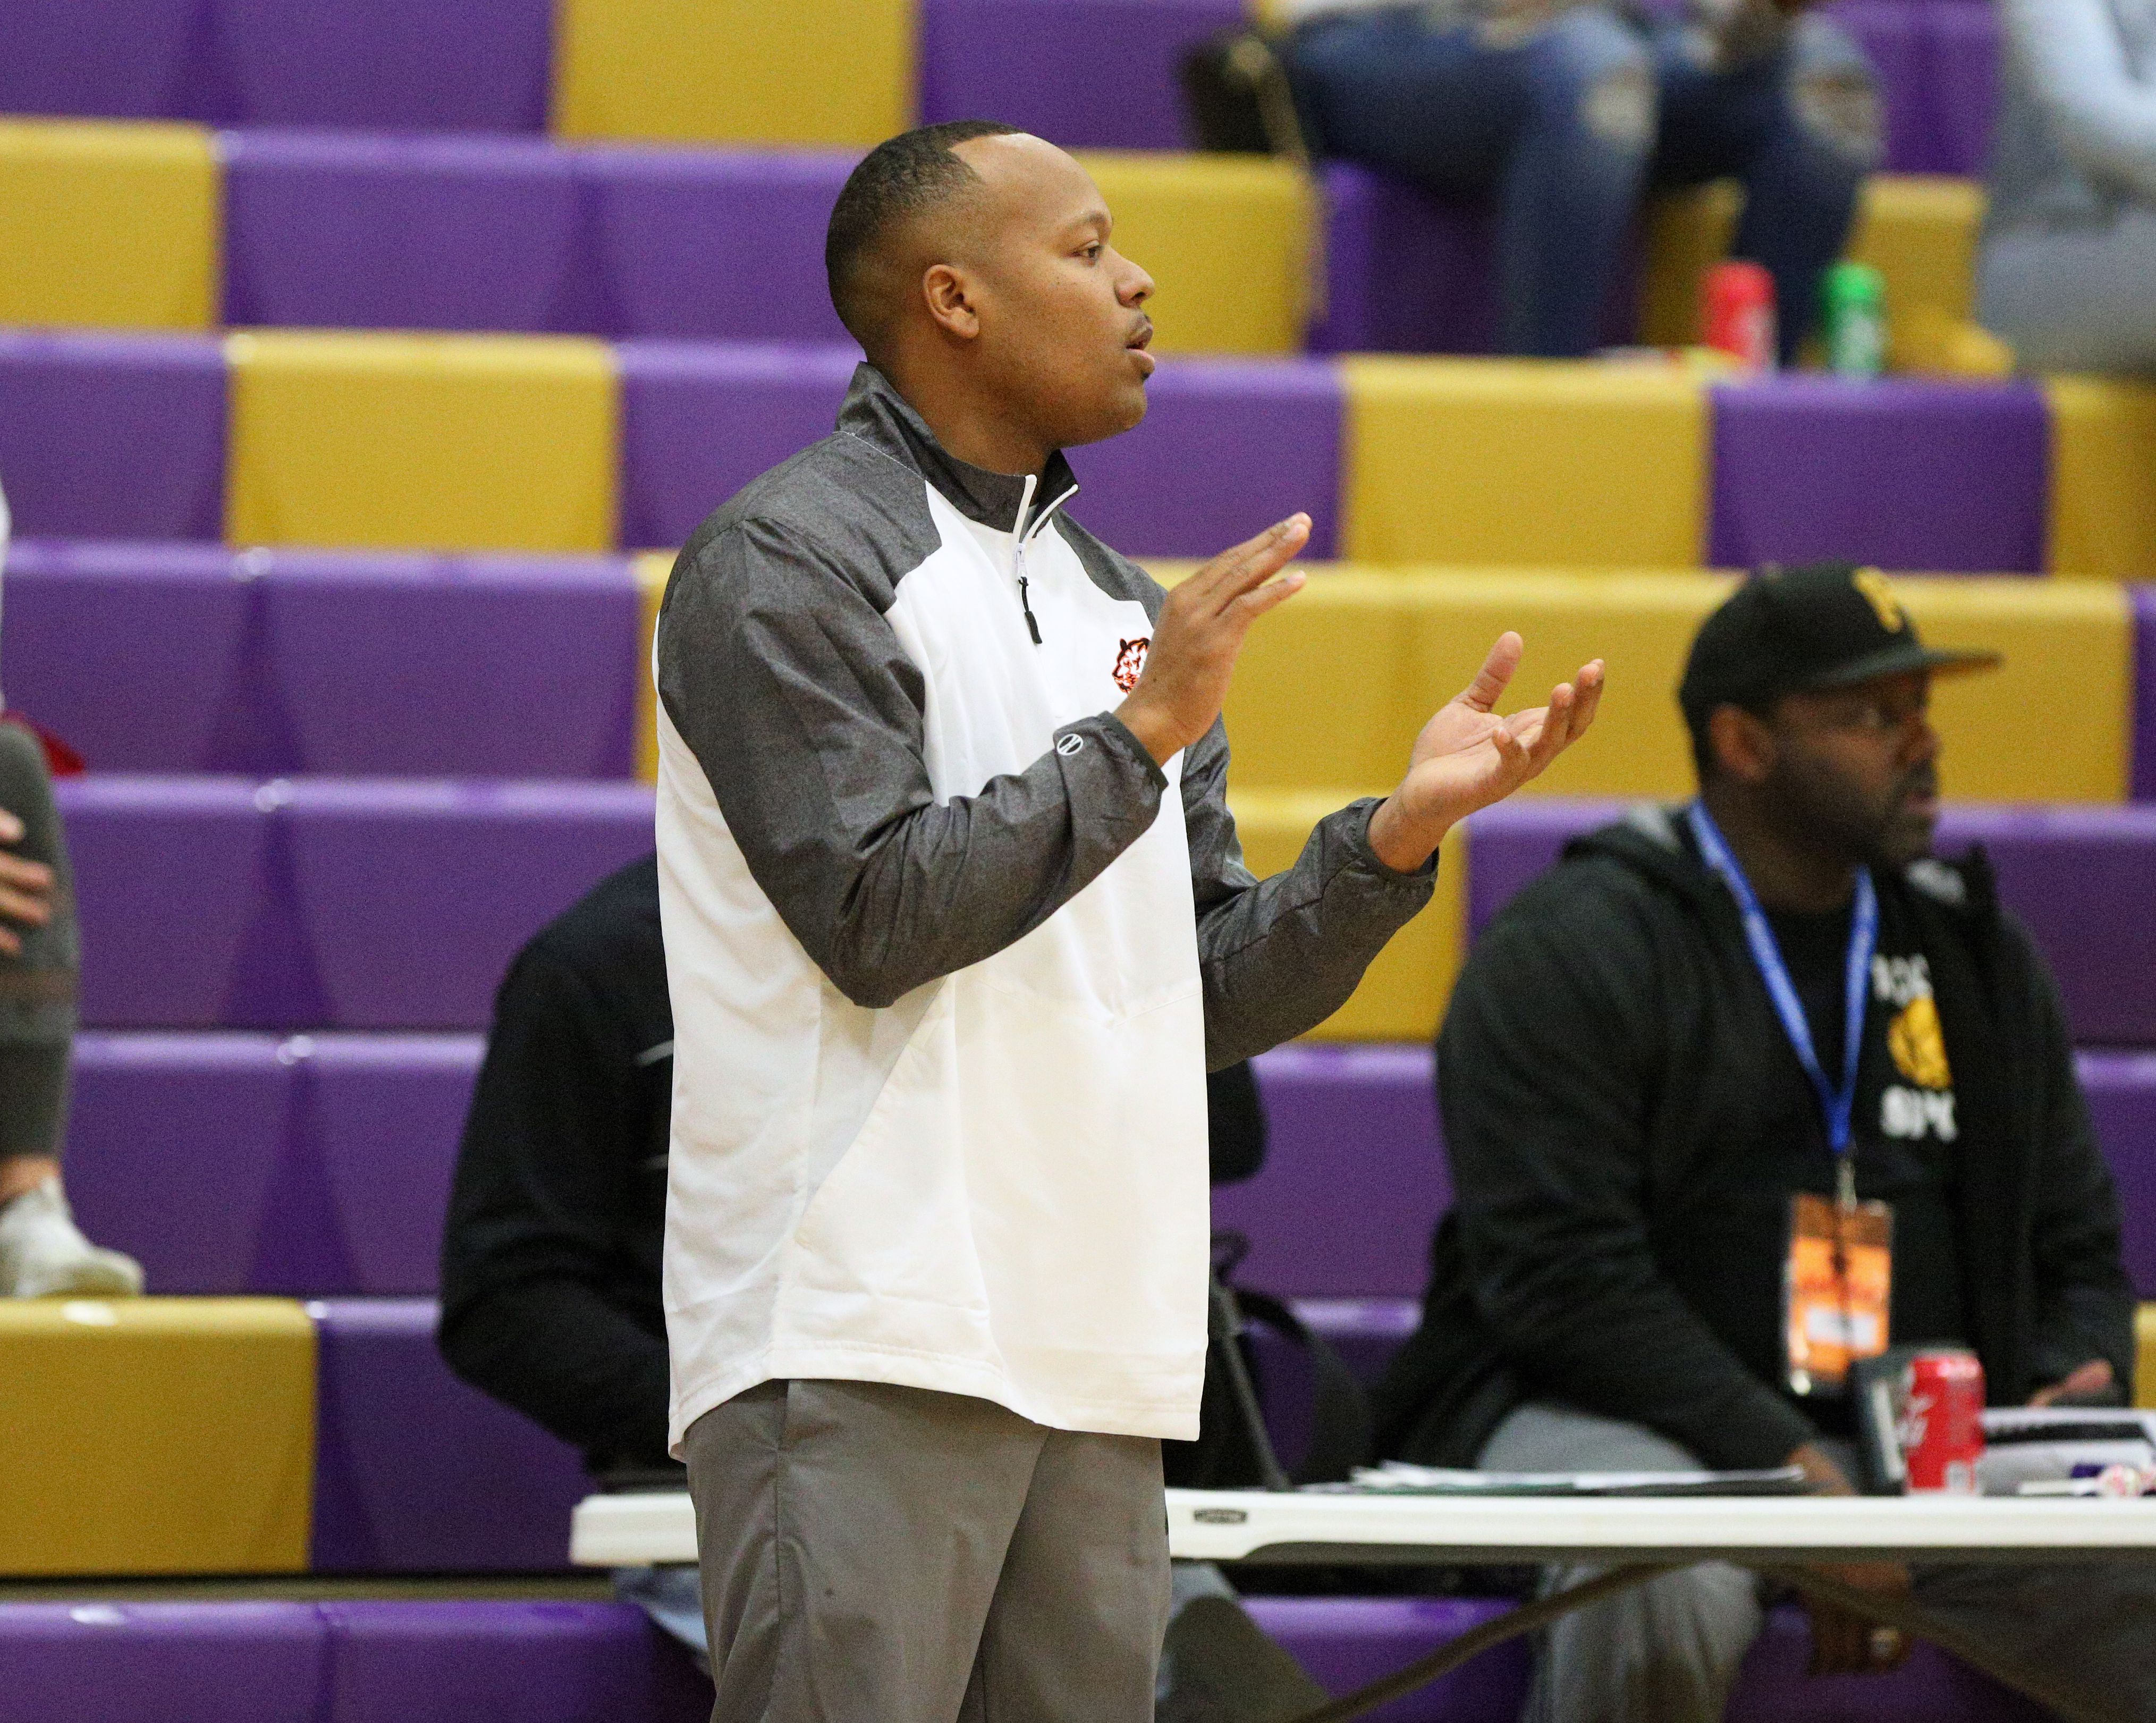 Mosley steps down as BHS basketball coach